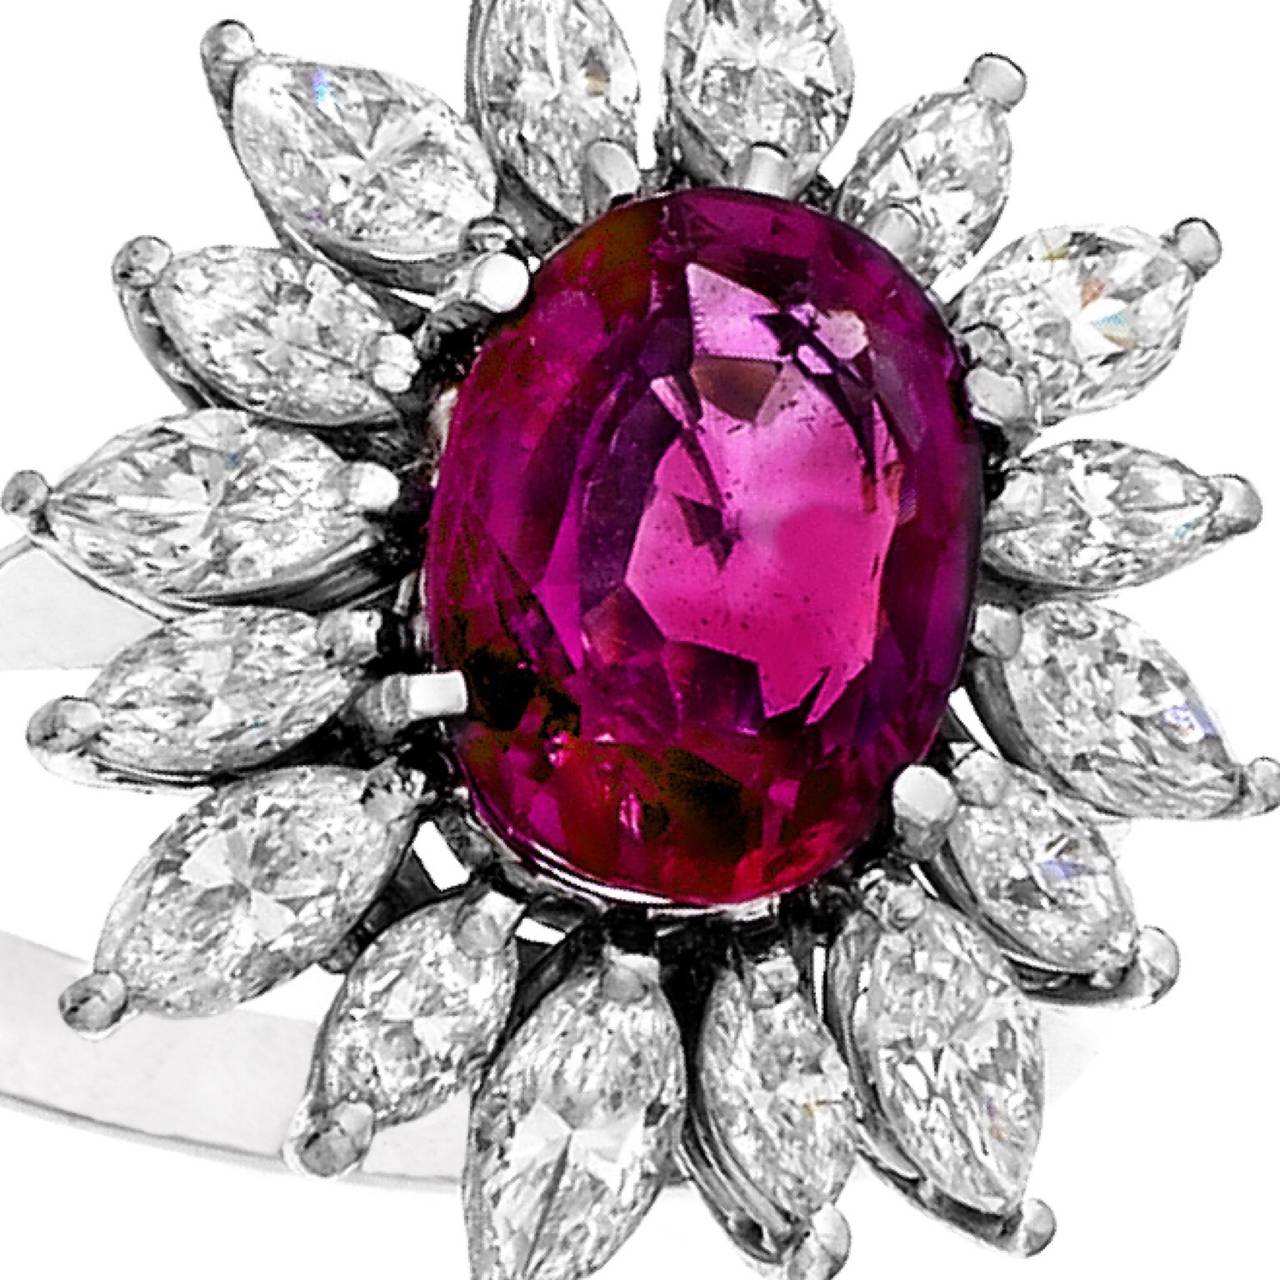 A 2.75 carat Burma Ruby sits in the center of this ring. Unheated natural Burma rubies are extremely rare, especially in this color. The center Ruby is surrounded with marquise shaped diamonds. 

Ruby: 2.75ct
Diamonds: approximately 2.00ct